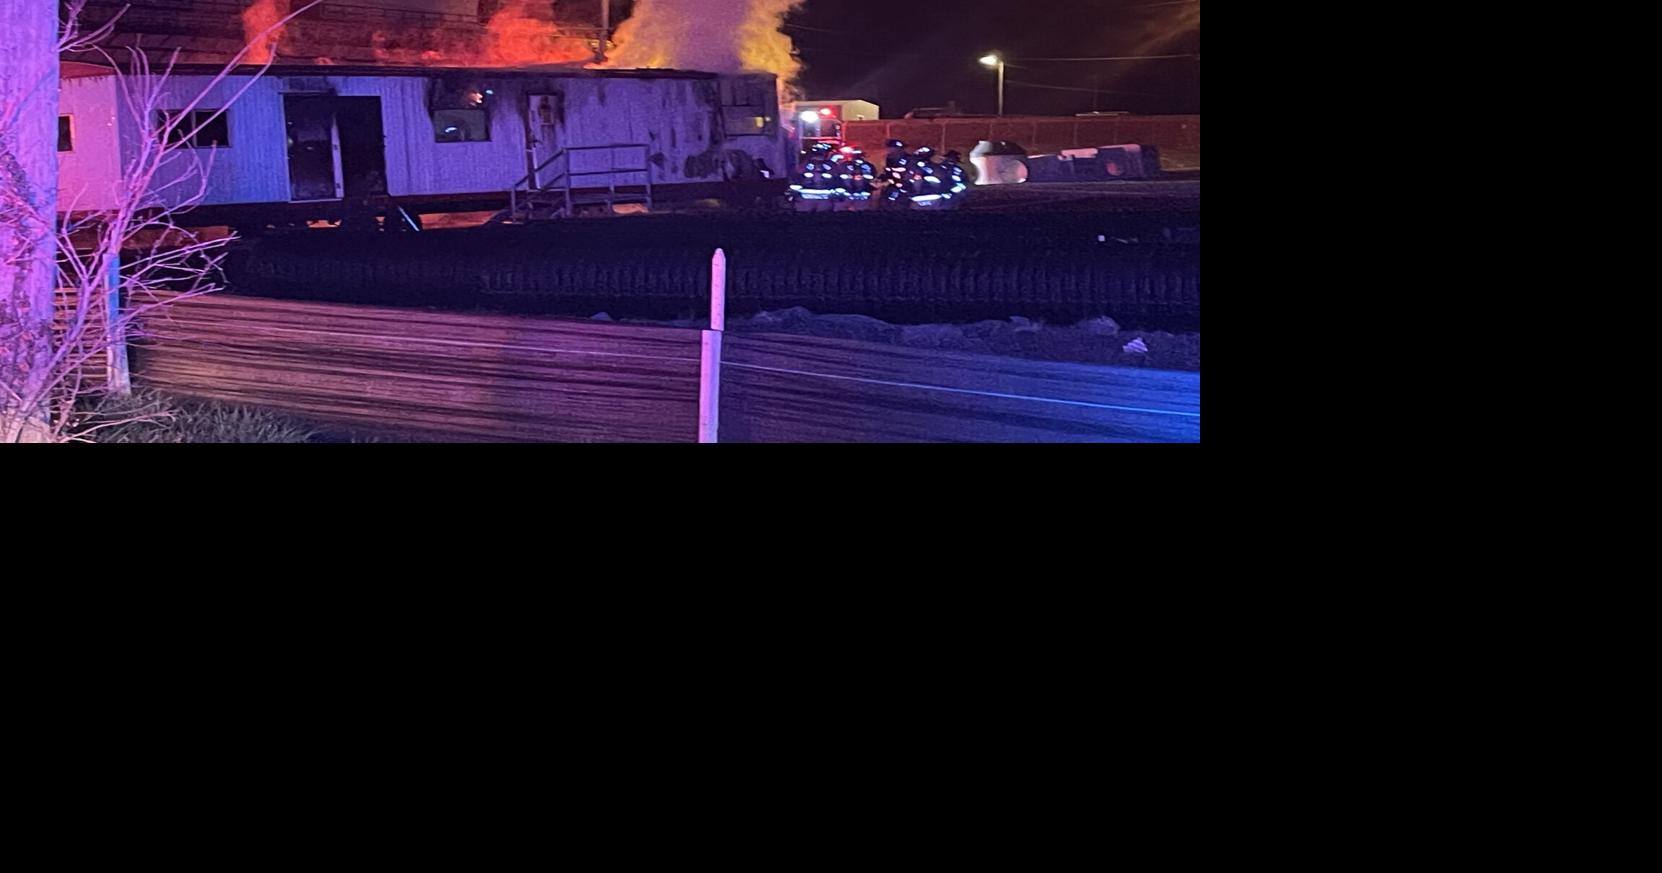 Firefighter from Columbia injured in fire on East Business Loop 70 | News from Mid-Missouri